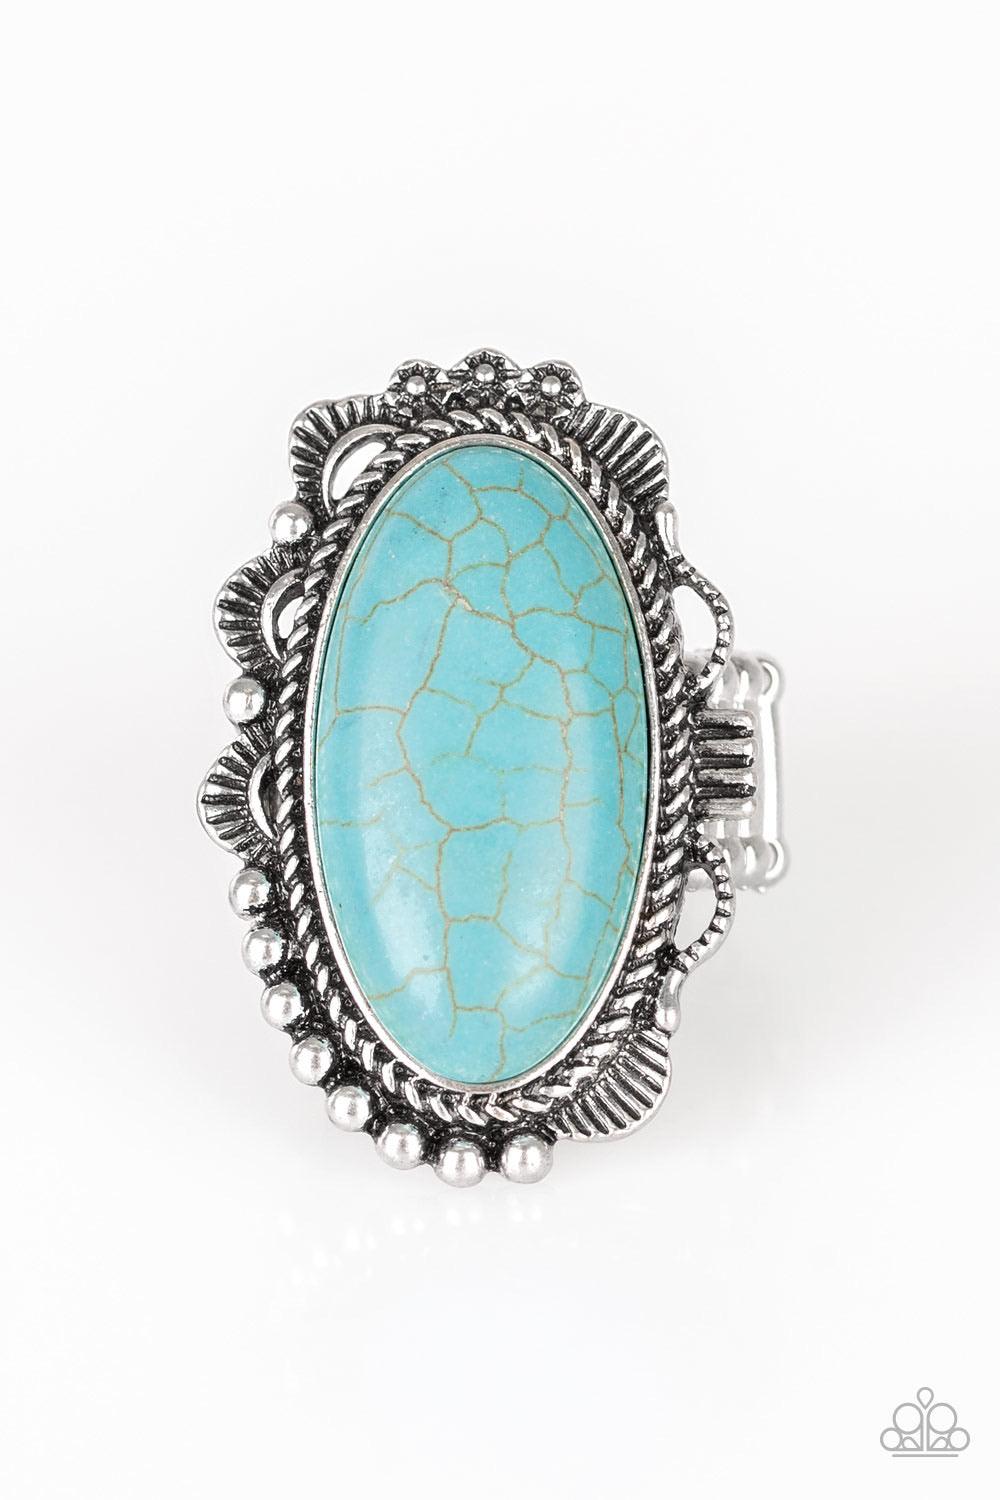 Paparazzi Accessories Open Range - Blue A refreshing turquoise stone is pressed into an ornate silver frame rippling with studded and serrated textures for a seasonal flair. Features a stretchy band for a flexible fit. Sold as one individual ring. Jewelry